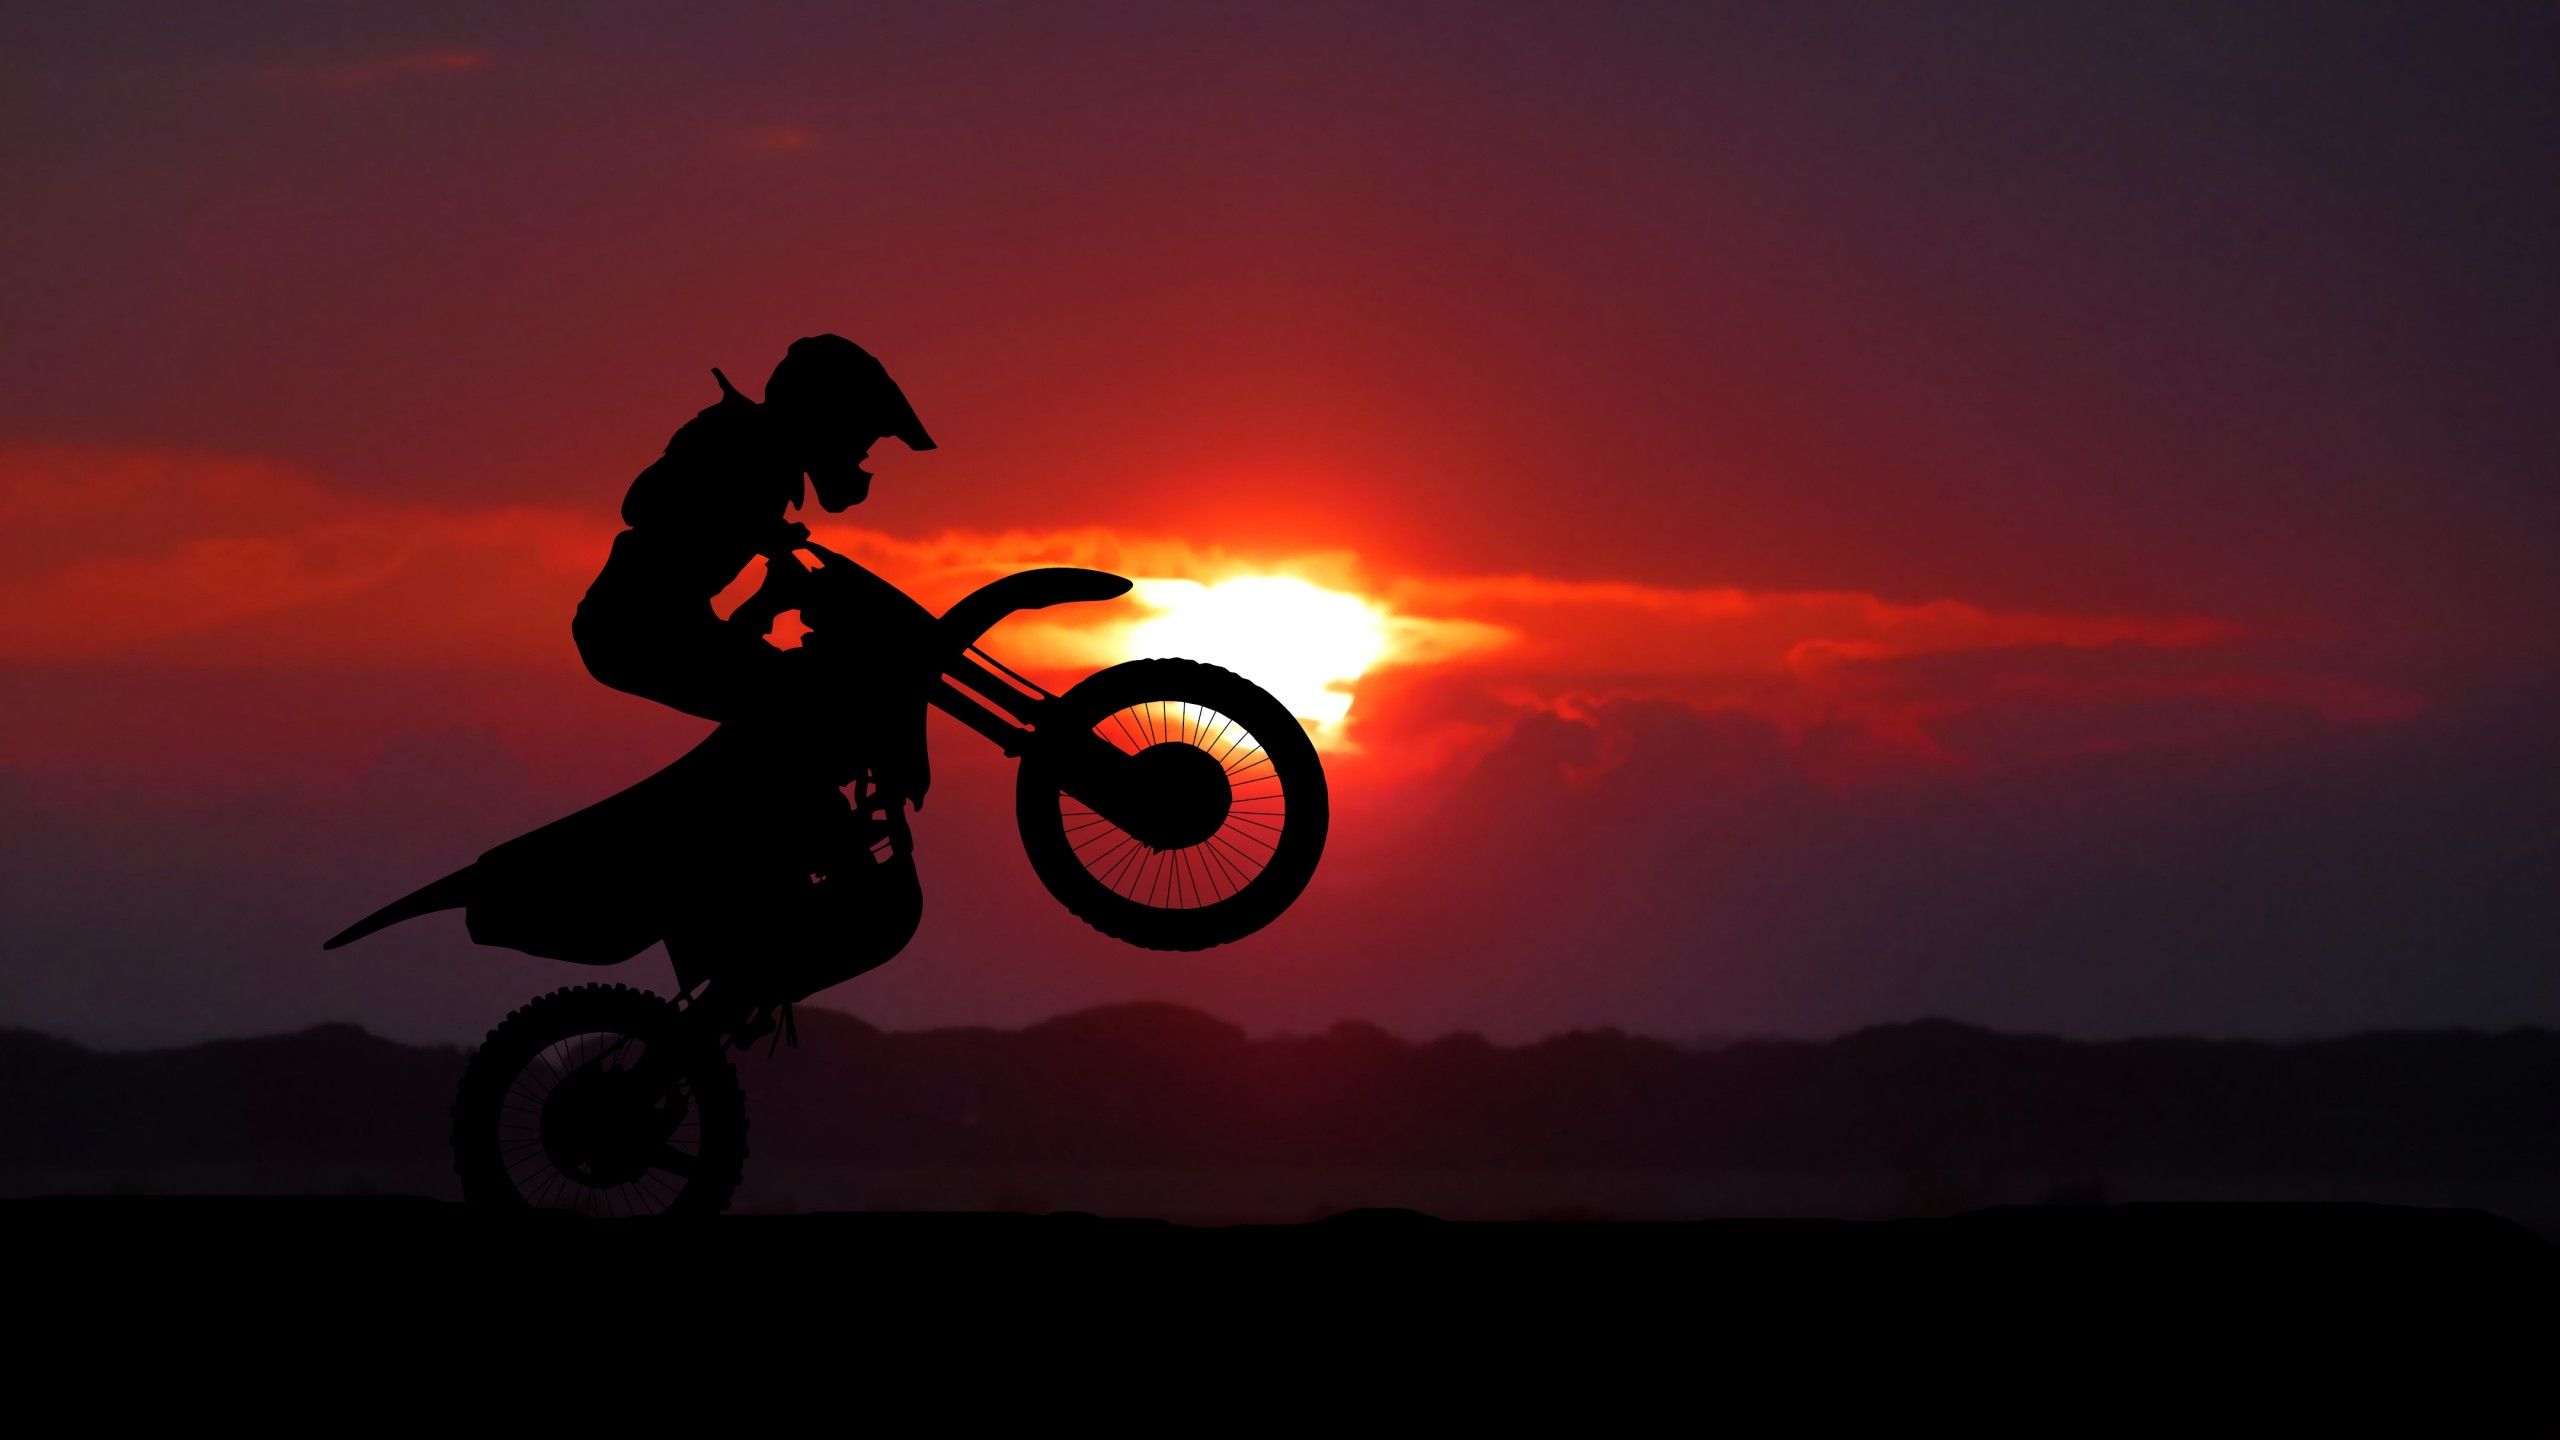 Motocross Motorcycle 4K Wallpaper, Motorcycle stunt, Silhouette, Sunset, Photography